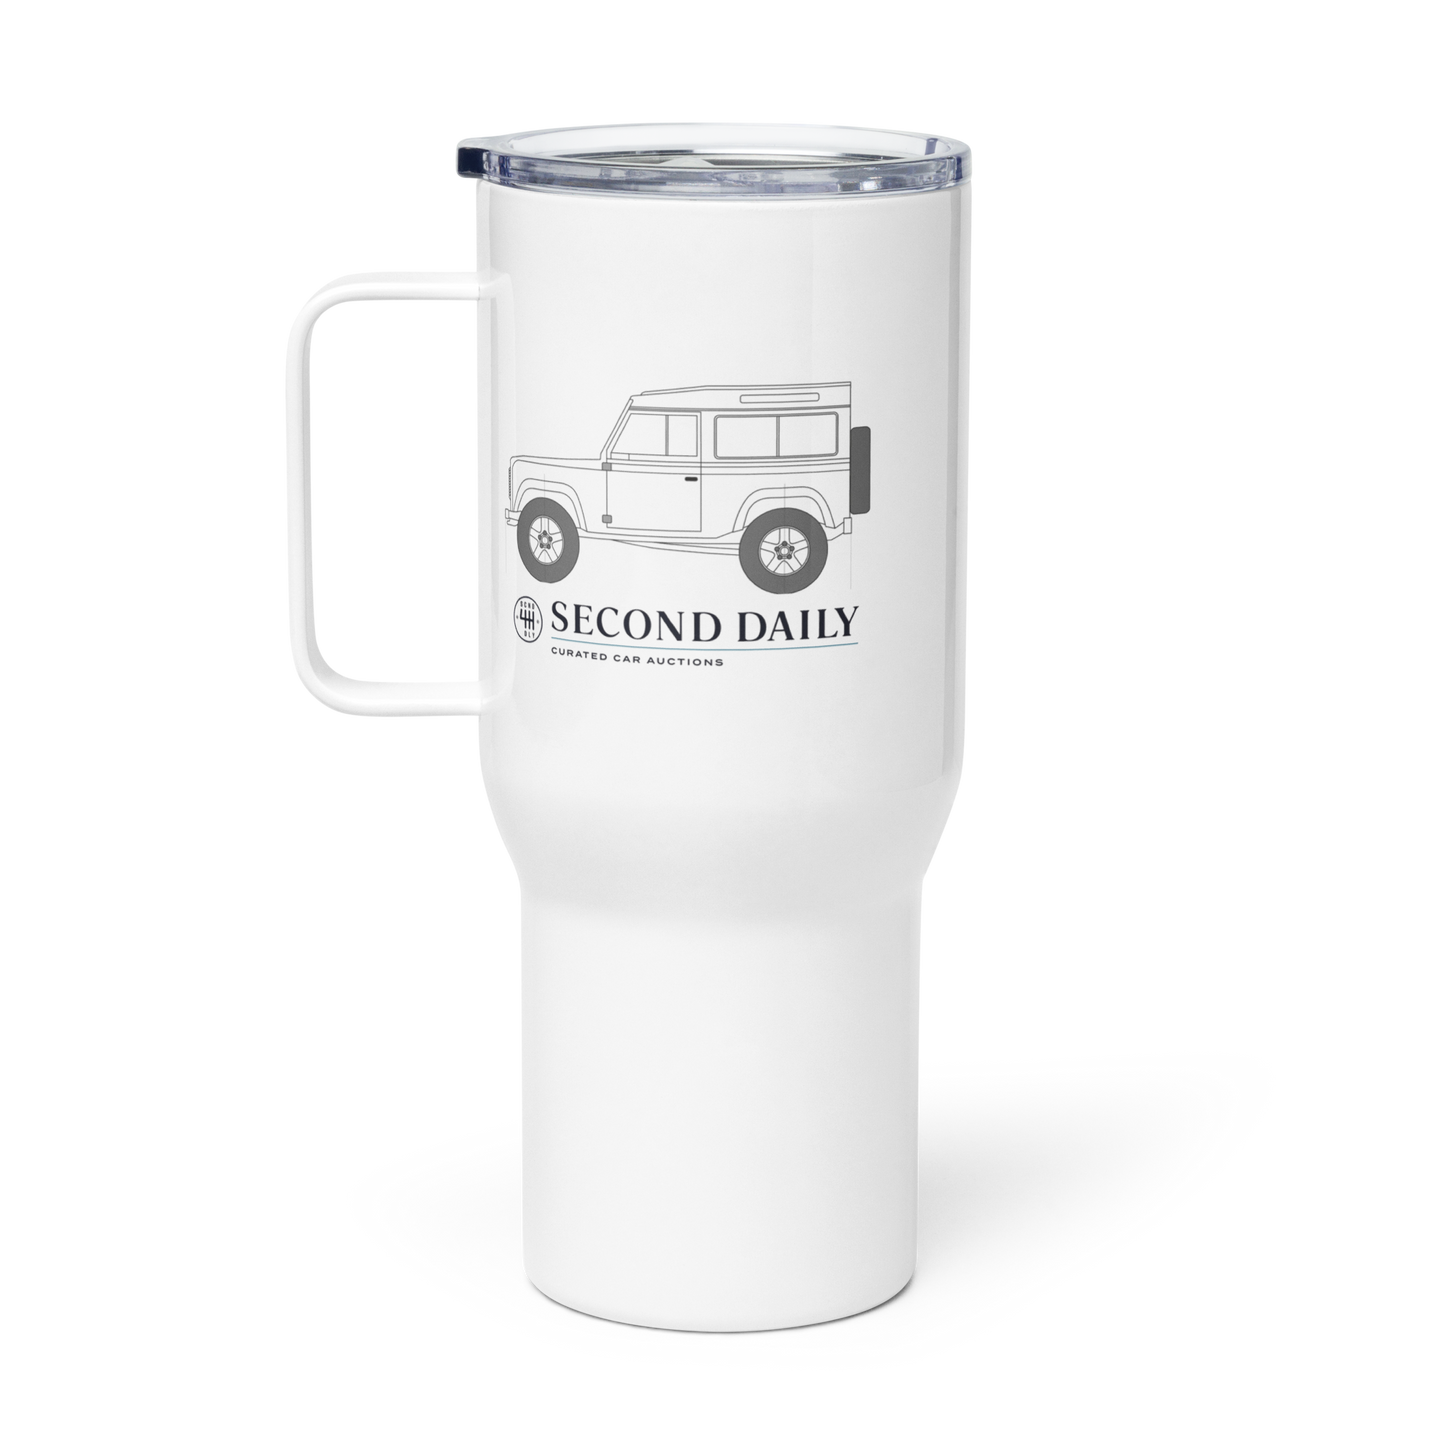 Second Daily - Defender 90 - Travel mug with a handle